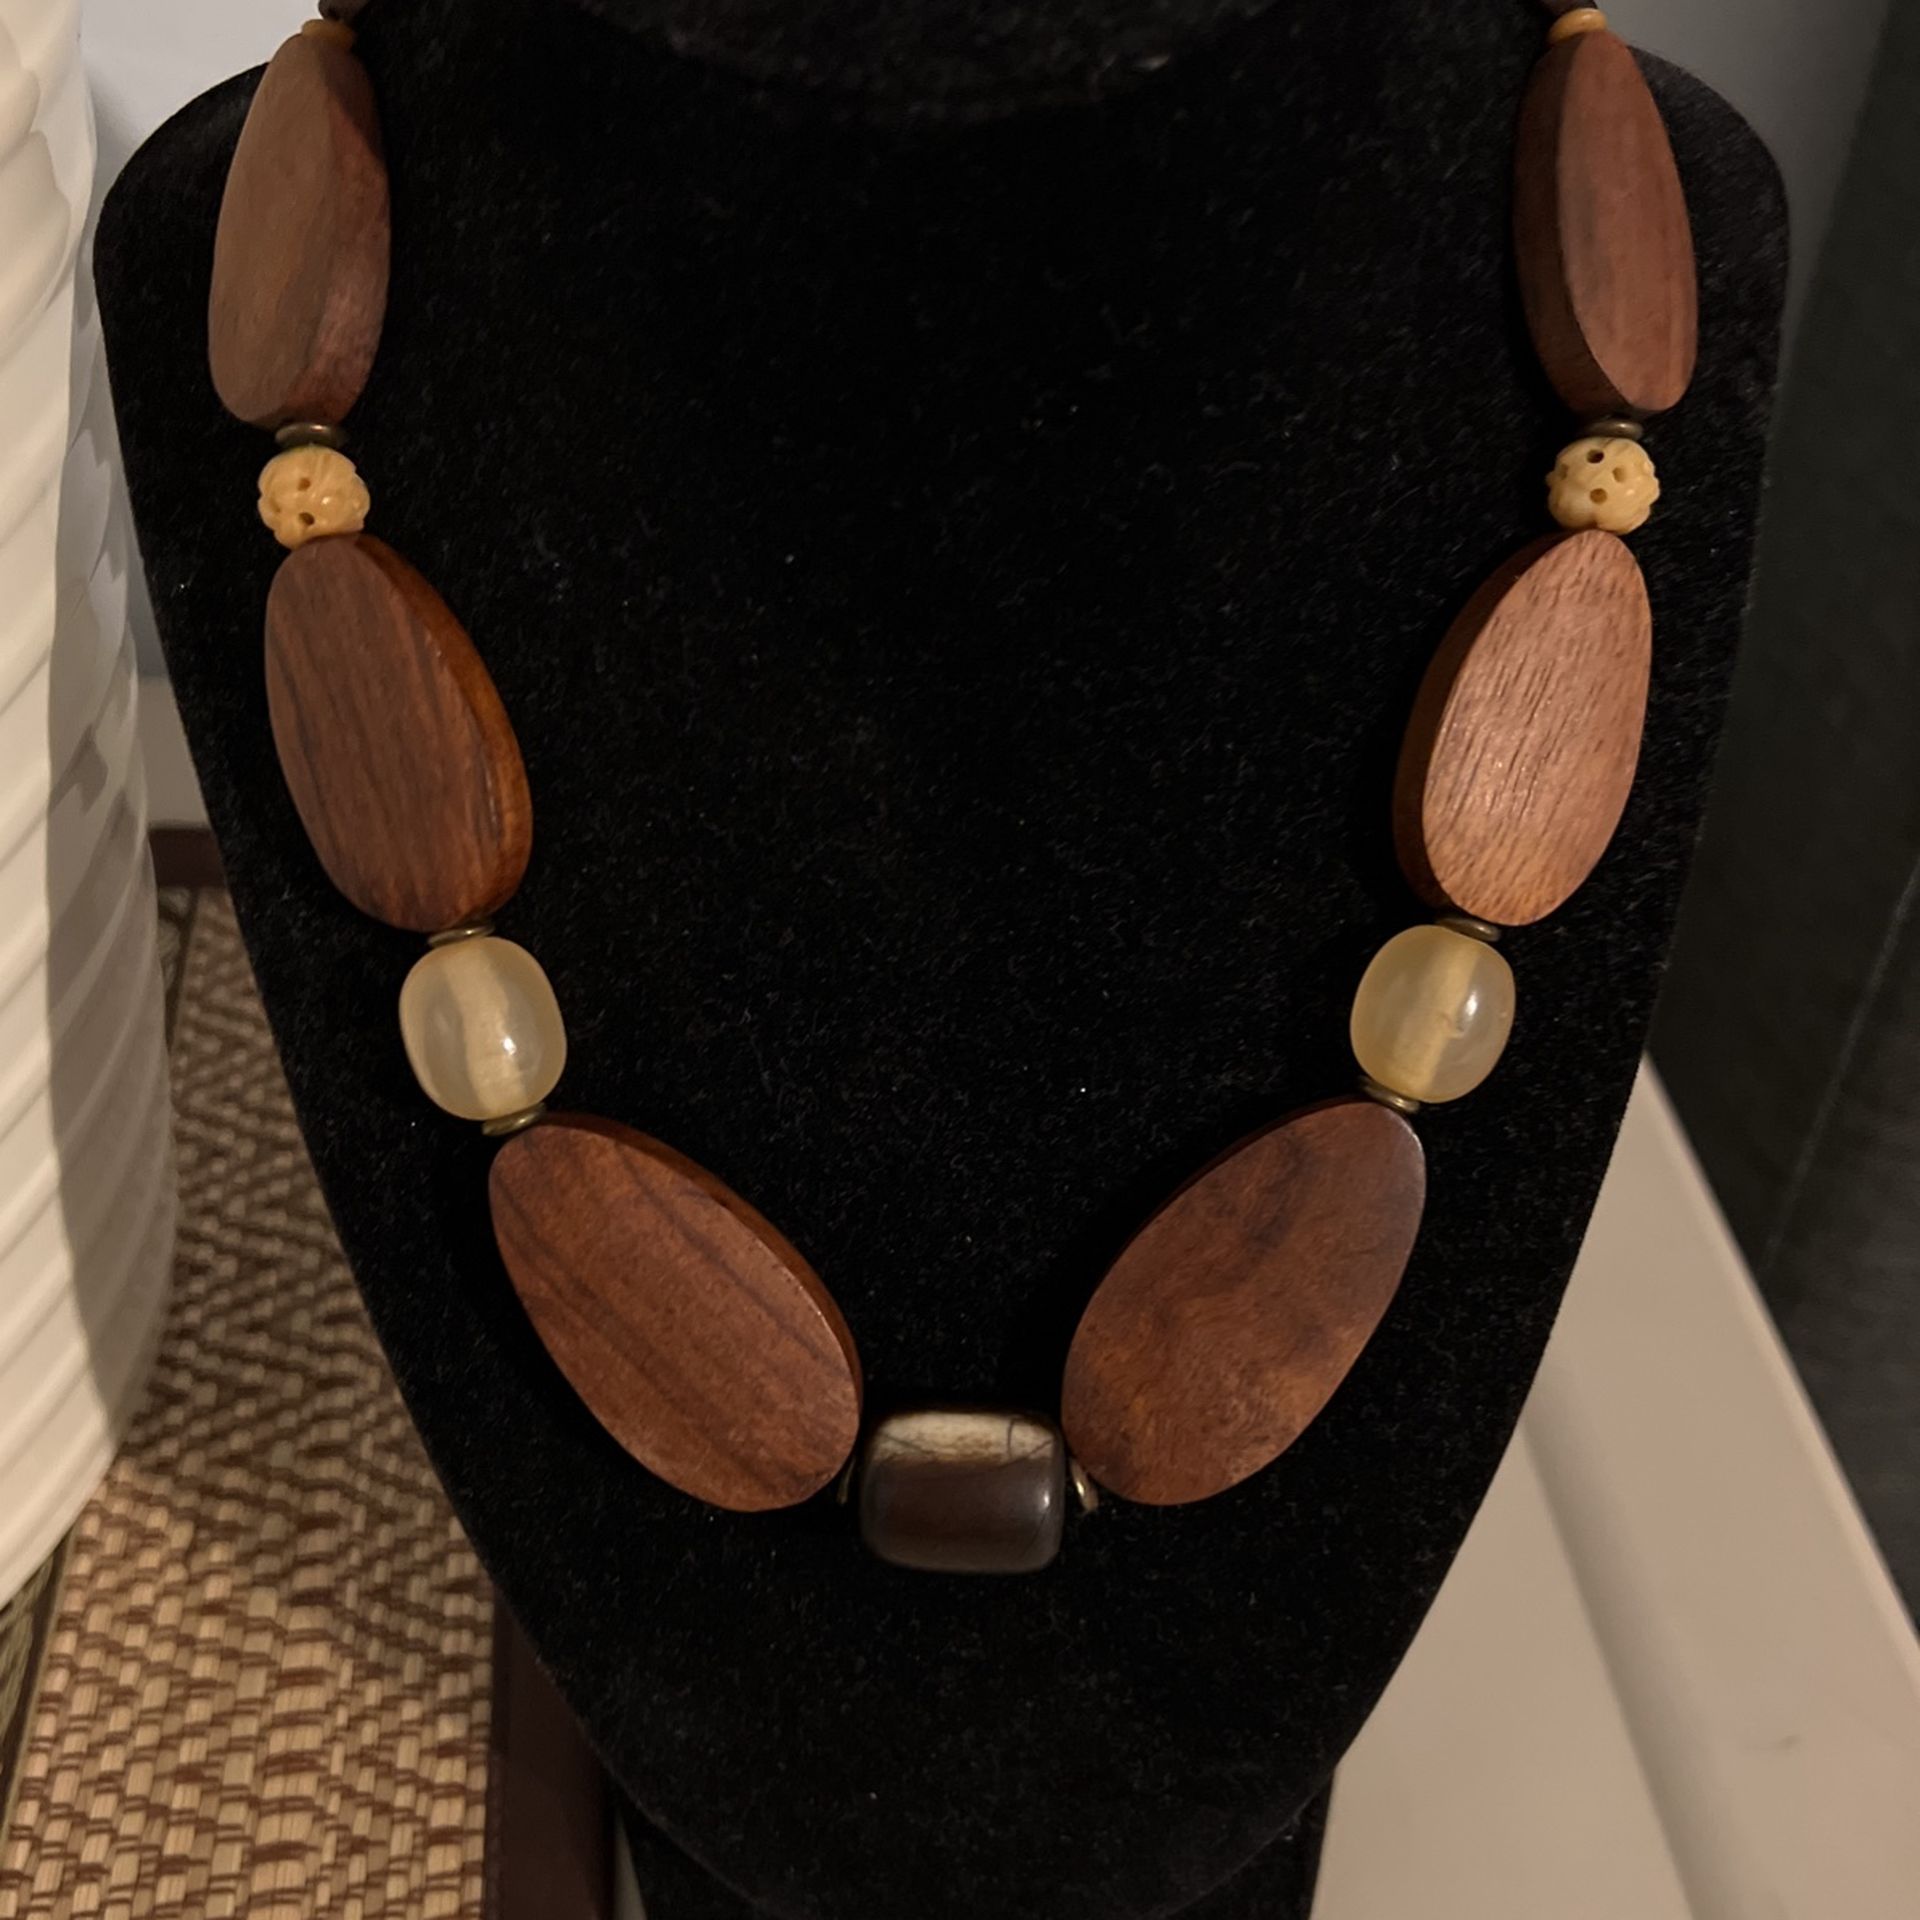 Wood with stone beads necklace